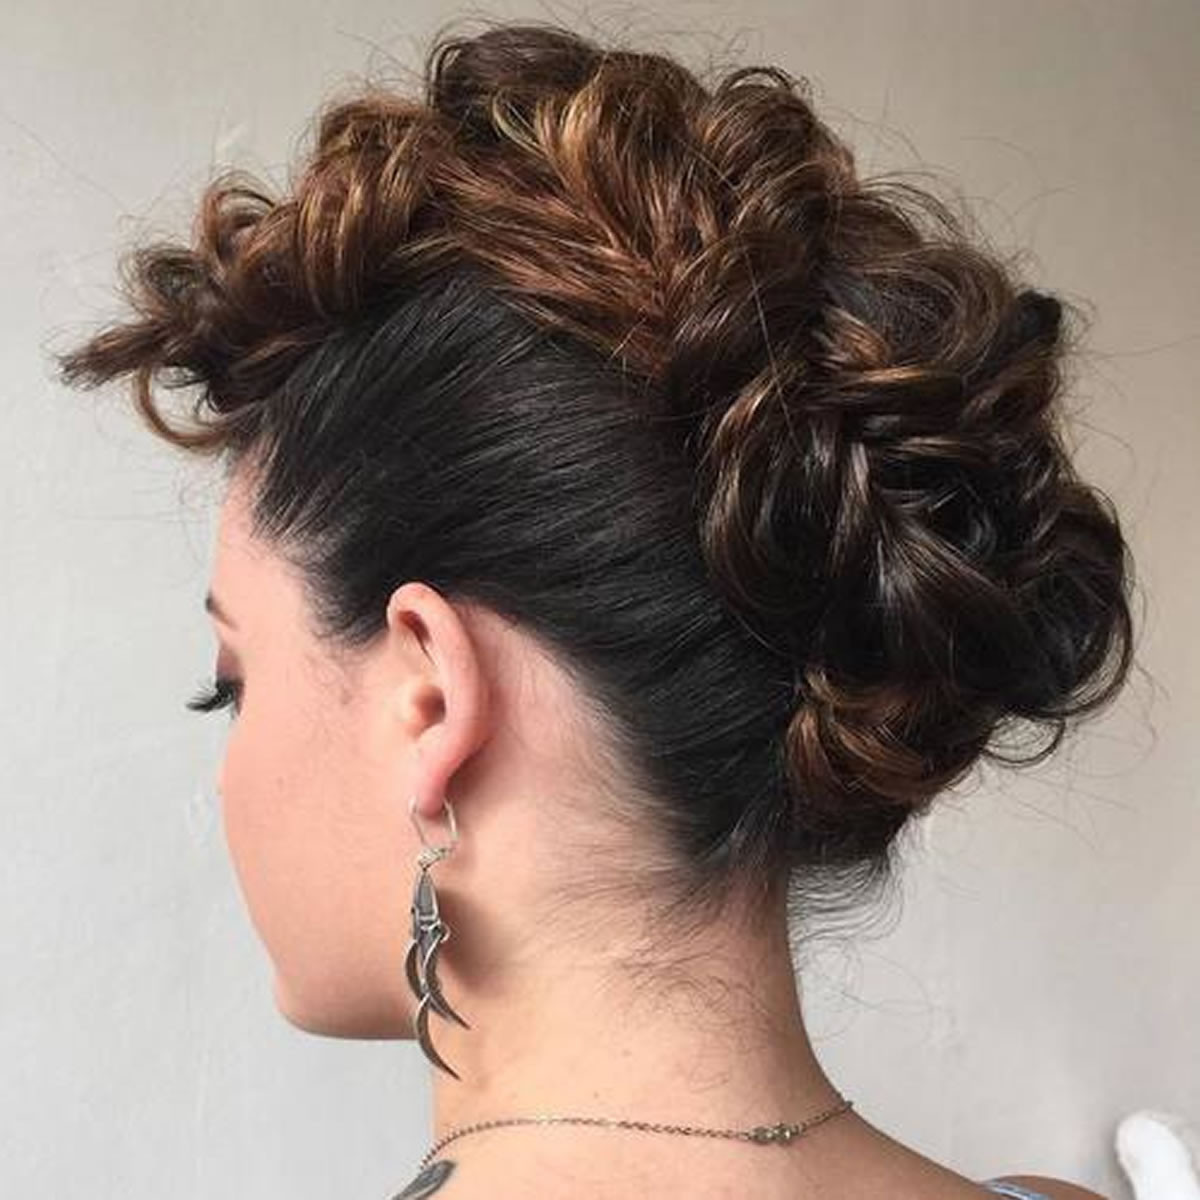 Updo Mohawk Hairstyles
 30 Glamorous Braided Mohawk Hairstyles for Girls and Women